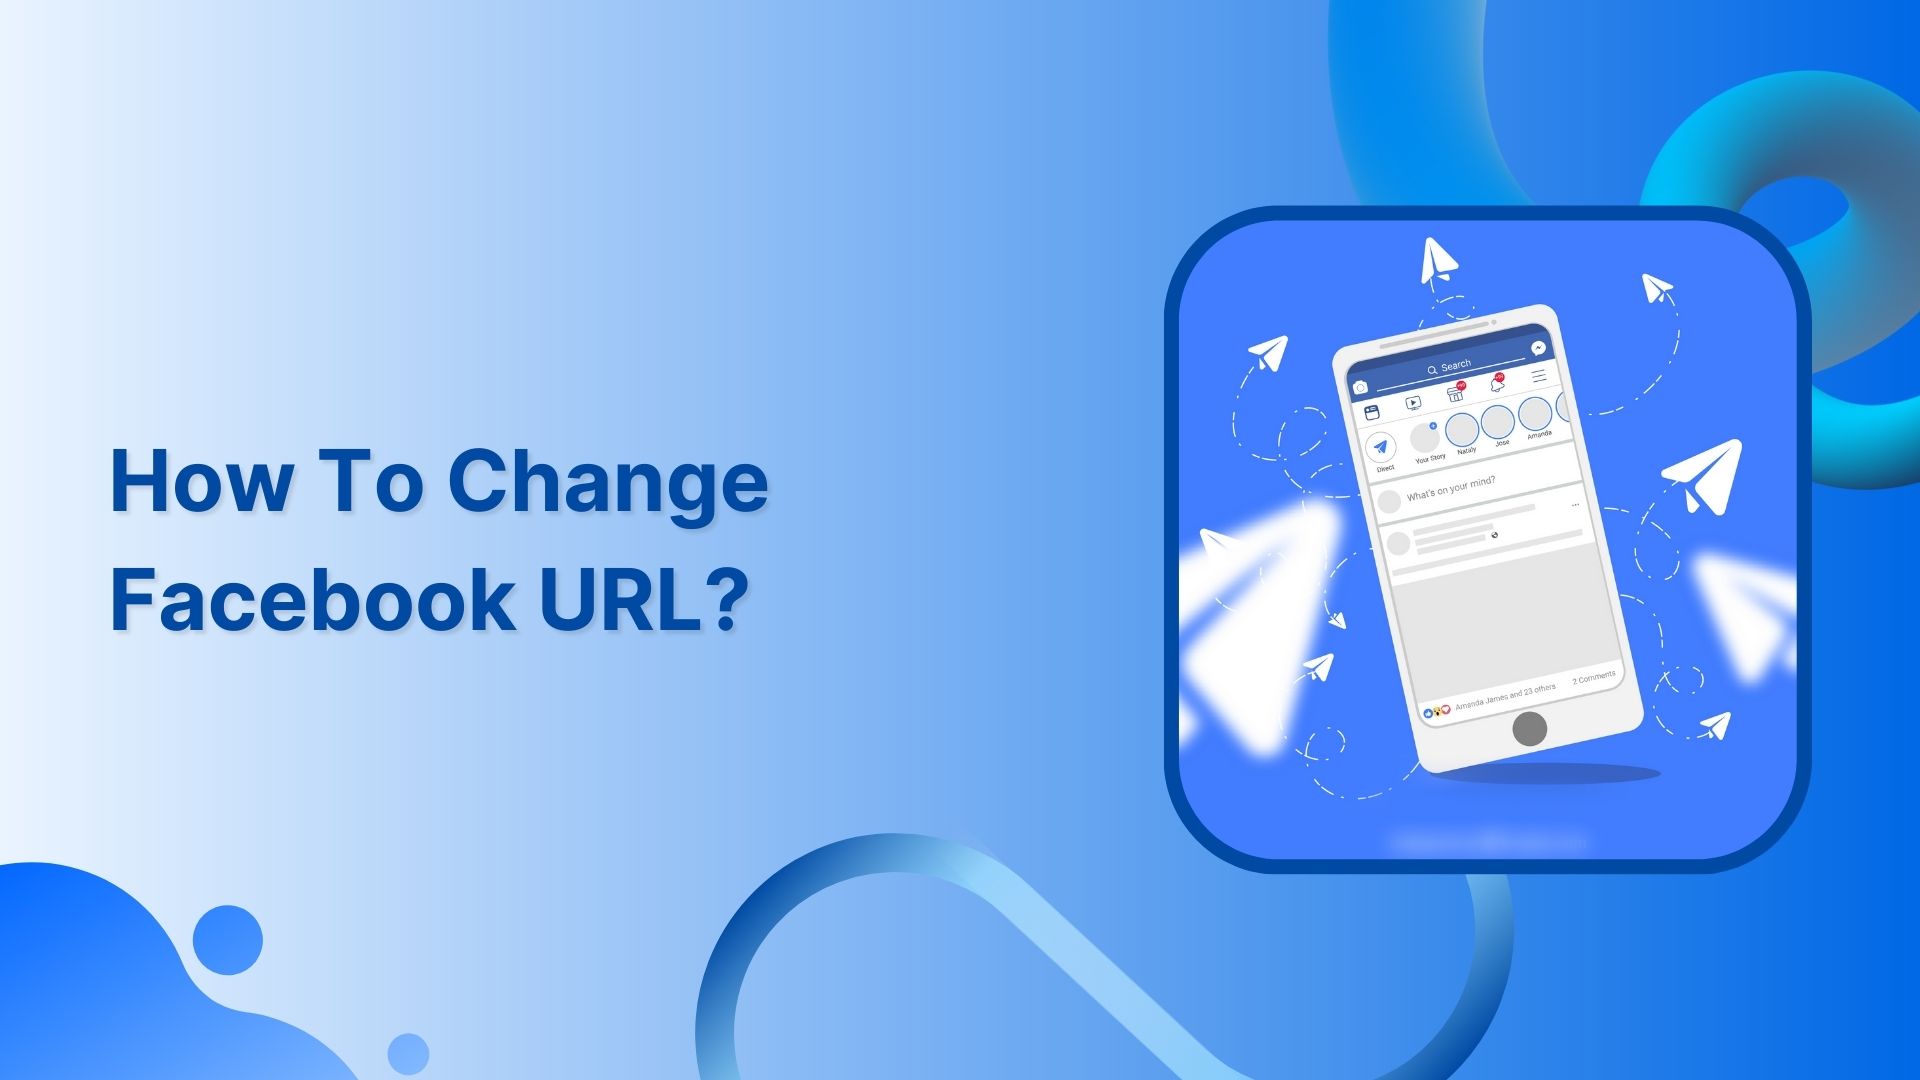 How to Change Facebook URL on Mobile and Desktop?